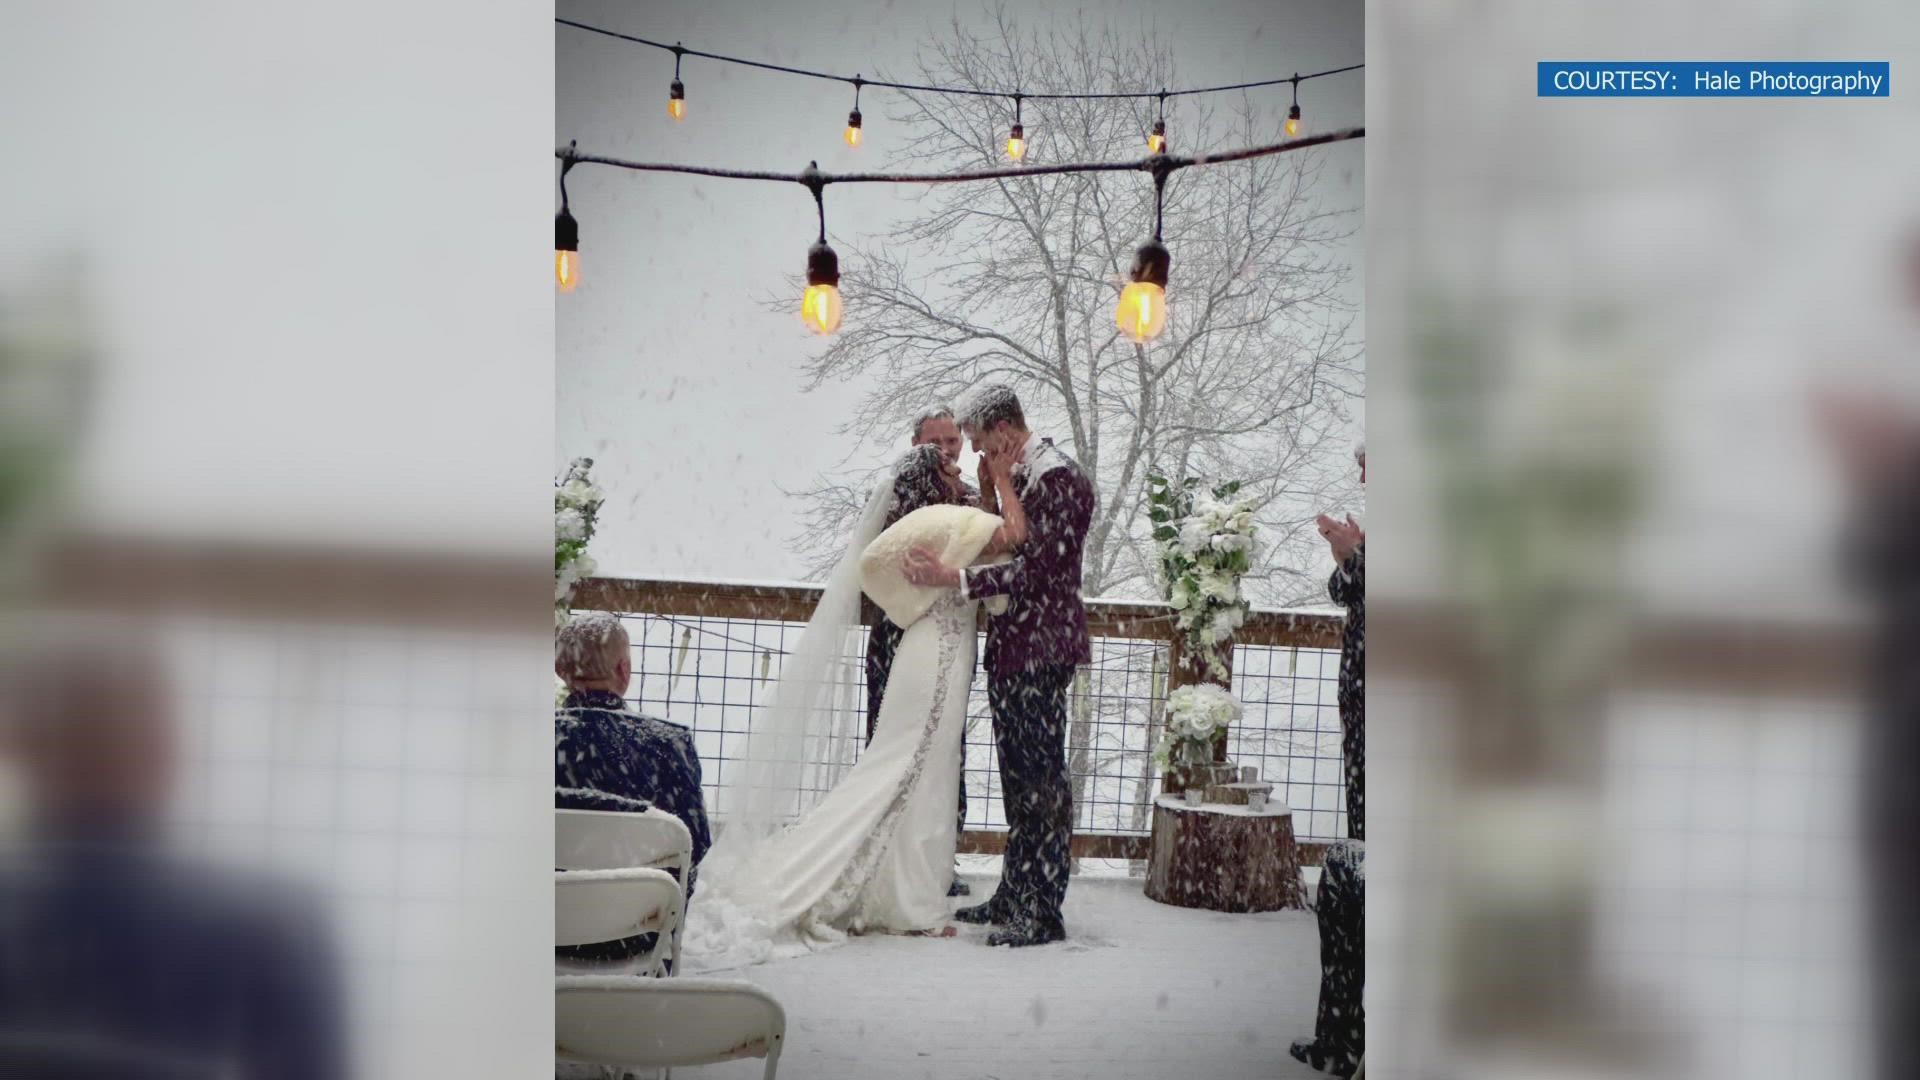 Snow can be a headache, but it can also be pretty magical. On Friday, it added to one couple's very special day!